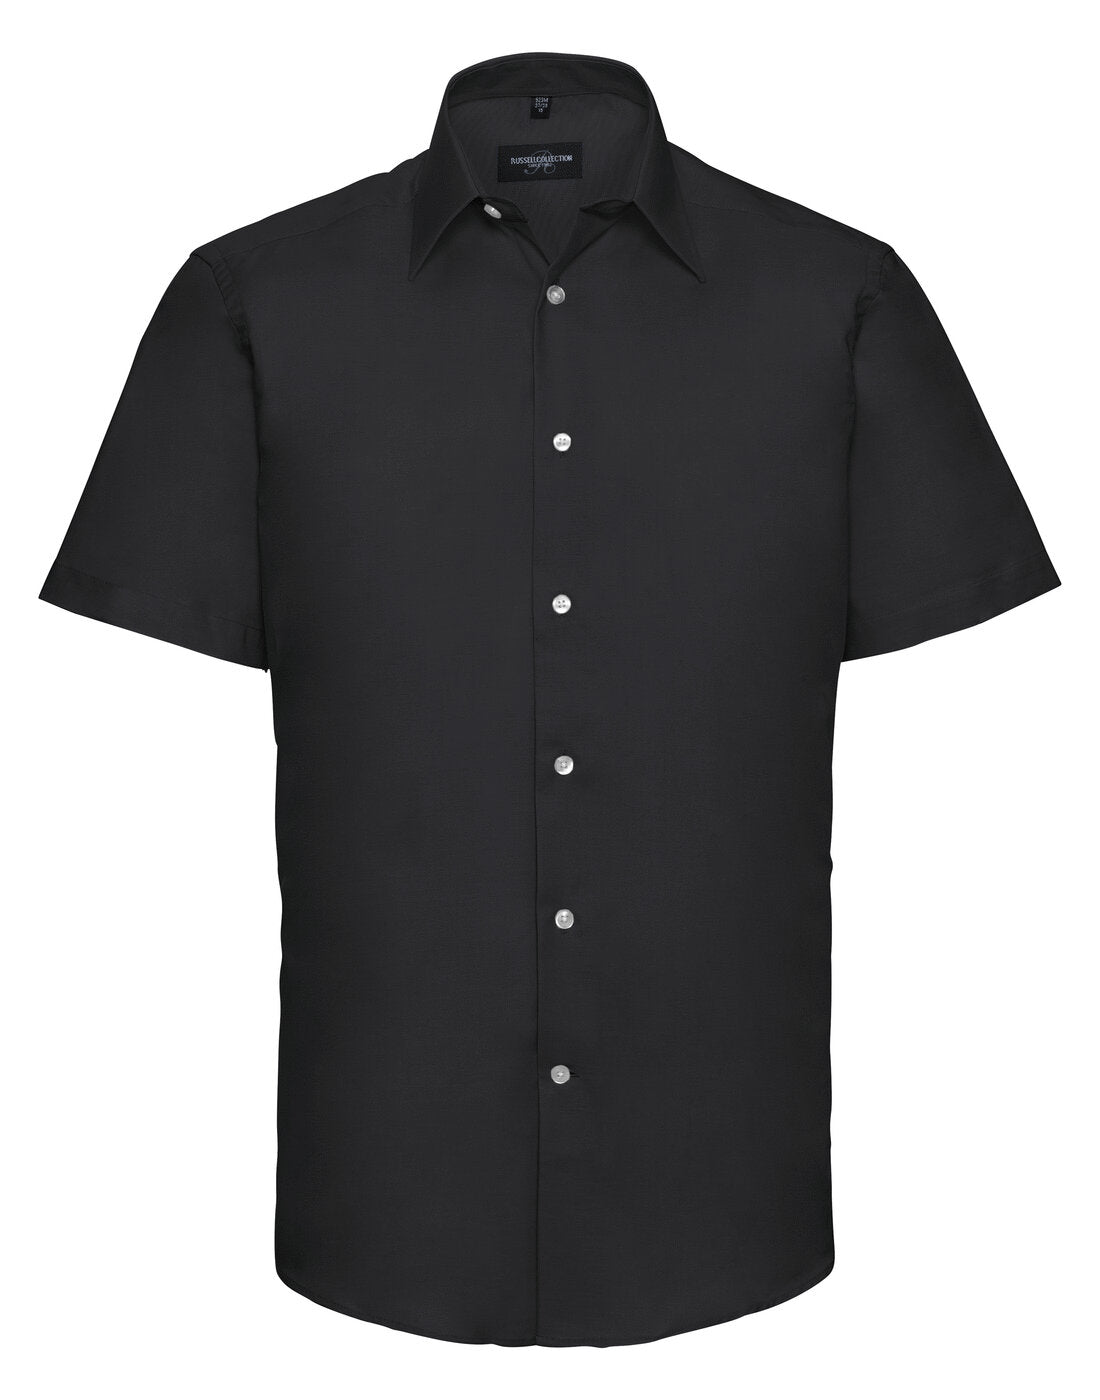 Russell Short Sleeve Tailored Oxford Shirt Black